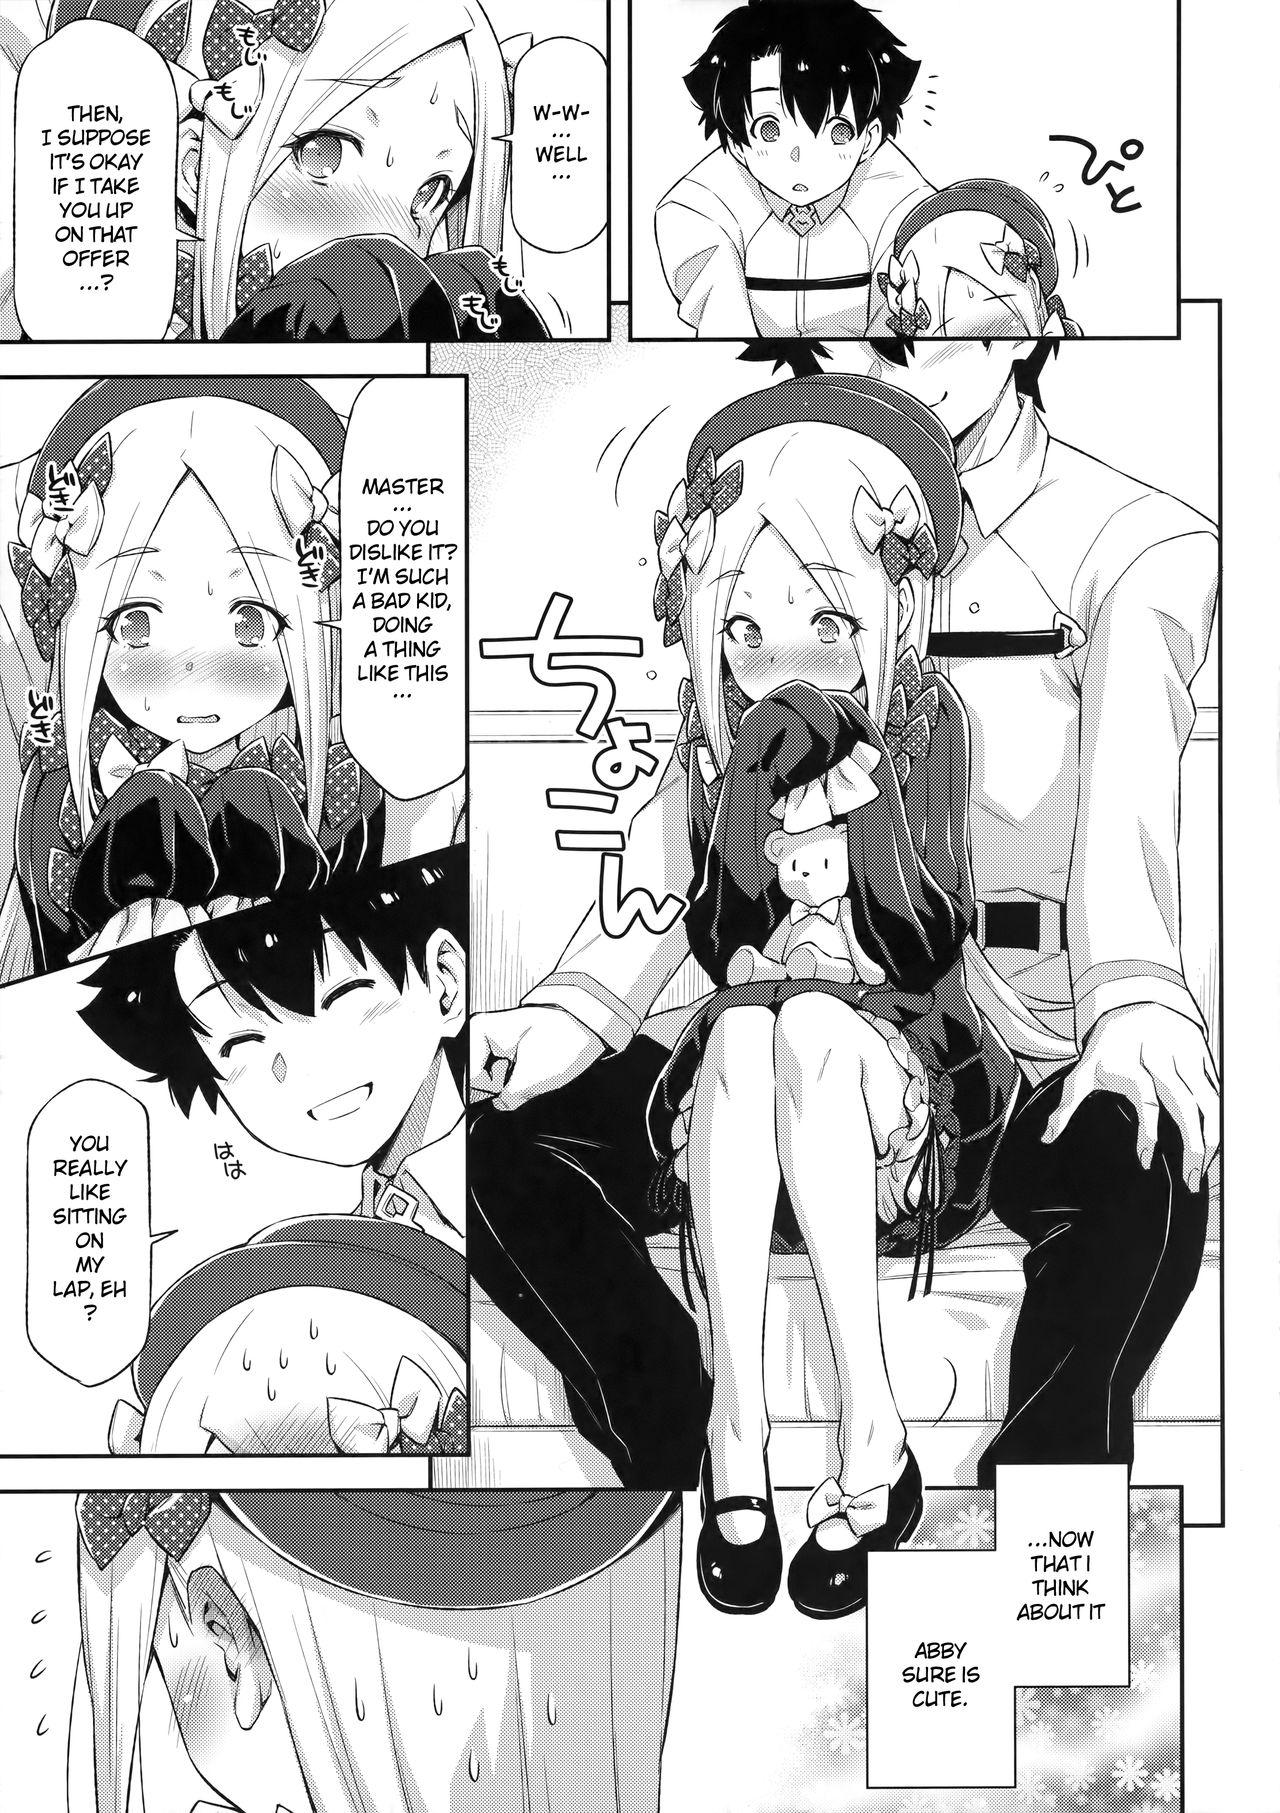 Point Of View Abigail Williams no Meijoushigataki Kawaisa | The Indescribable Cuteness of Abigail Williams - Fate grand order Best Blowjobs - Page 6